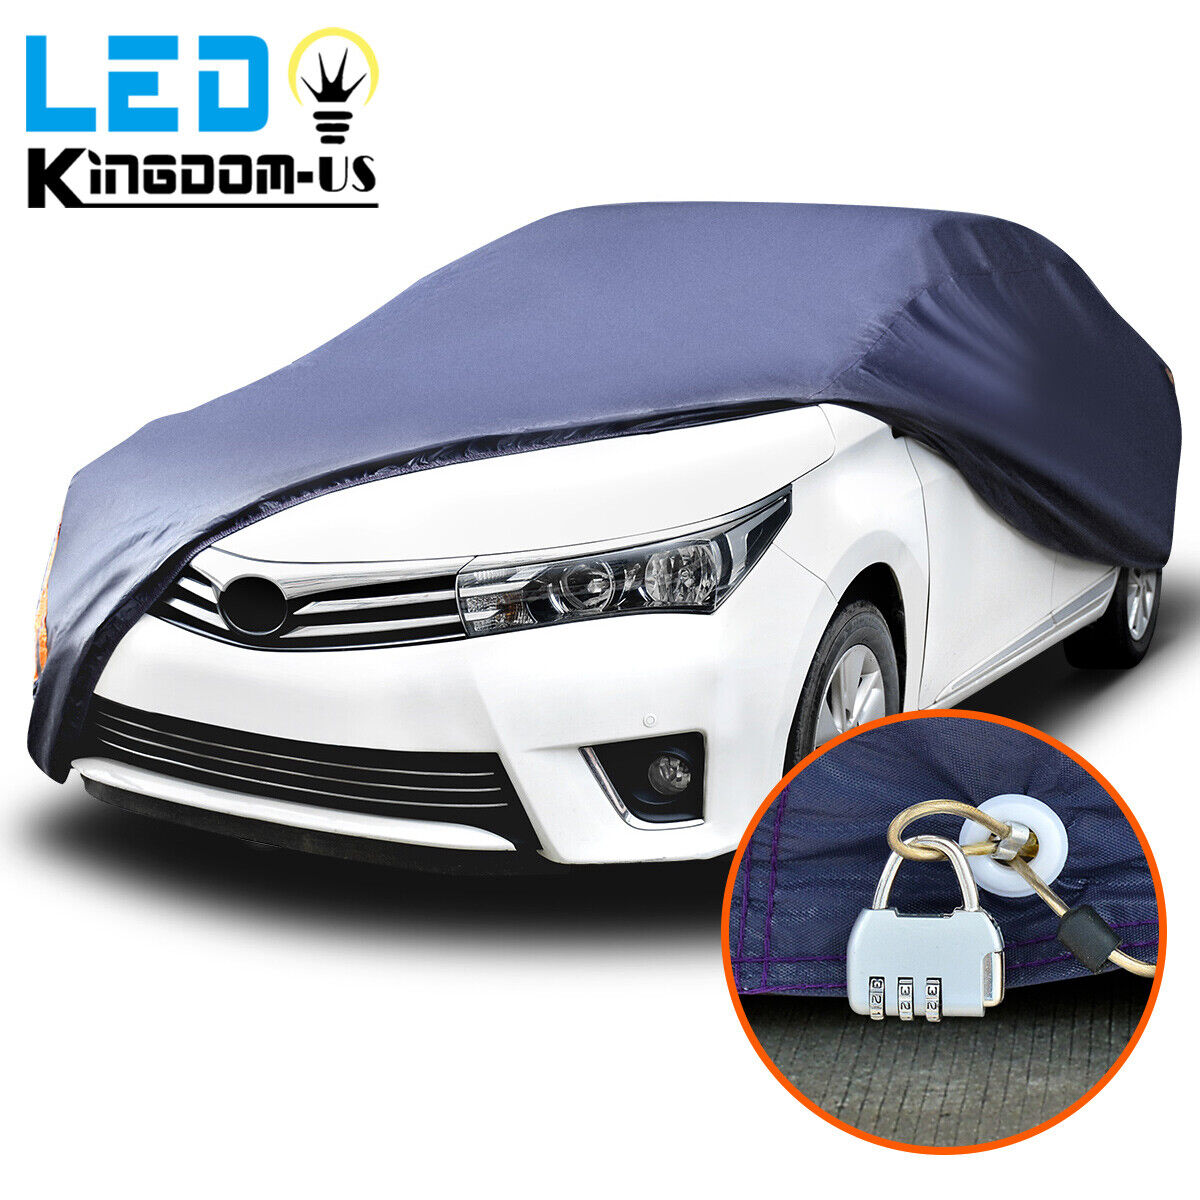 Universal Fit Car Cover Waterproof Breathable Seamless All Weather Protection US